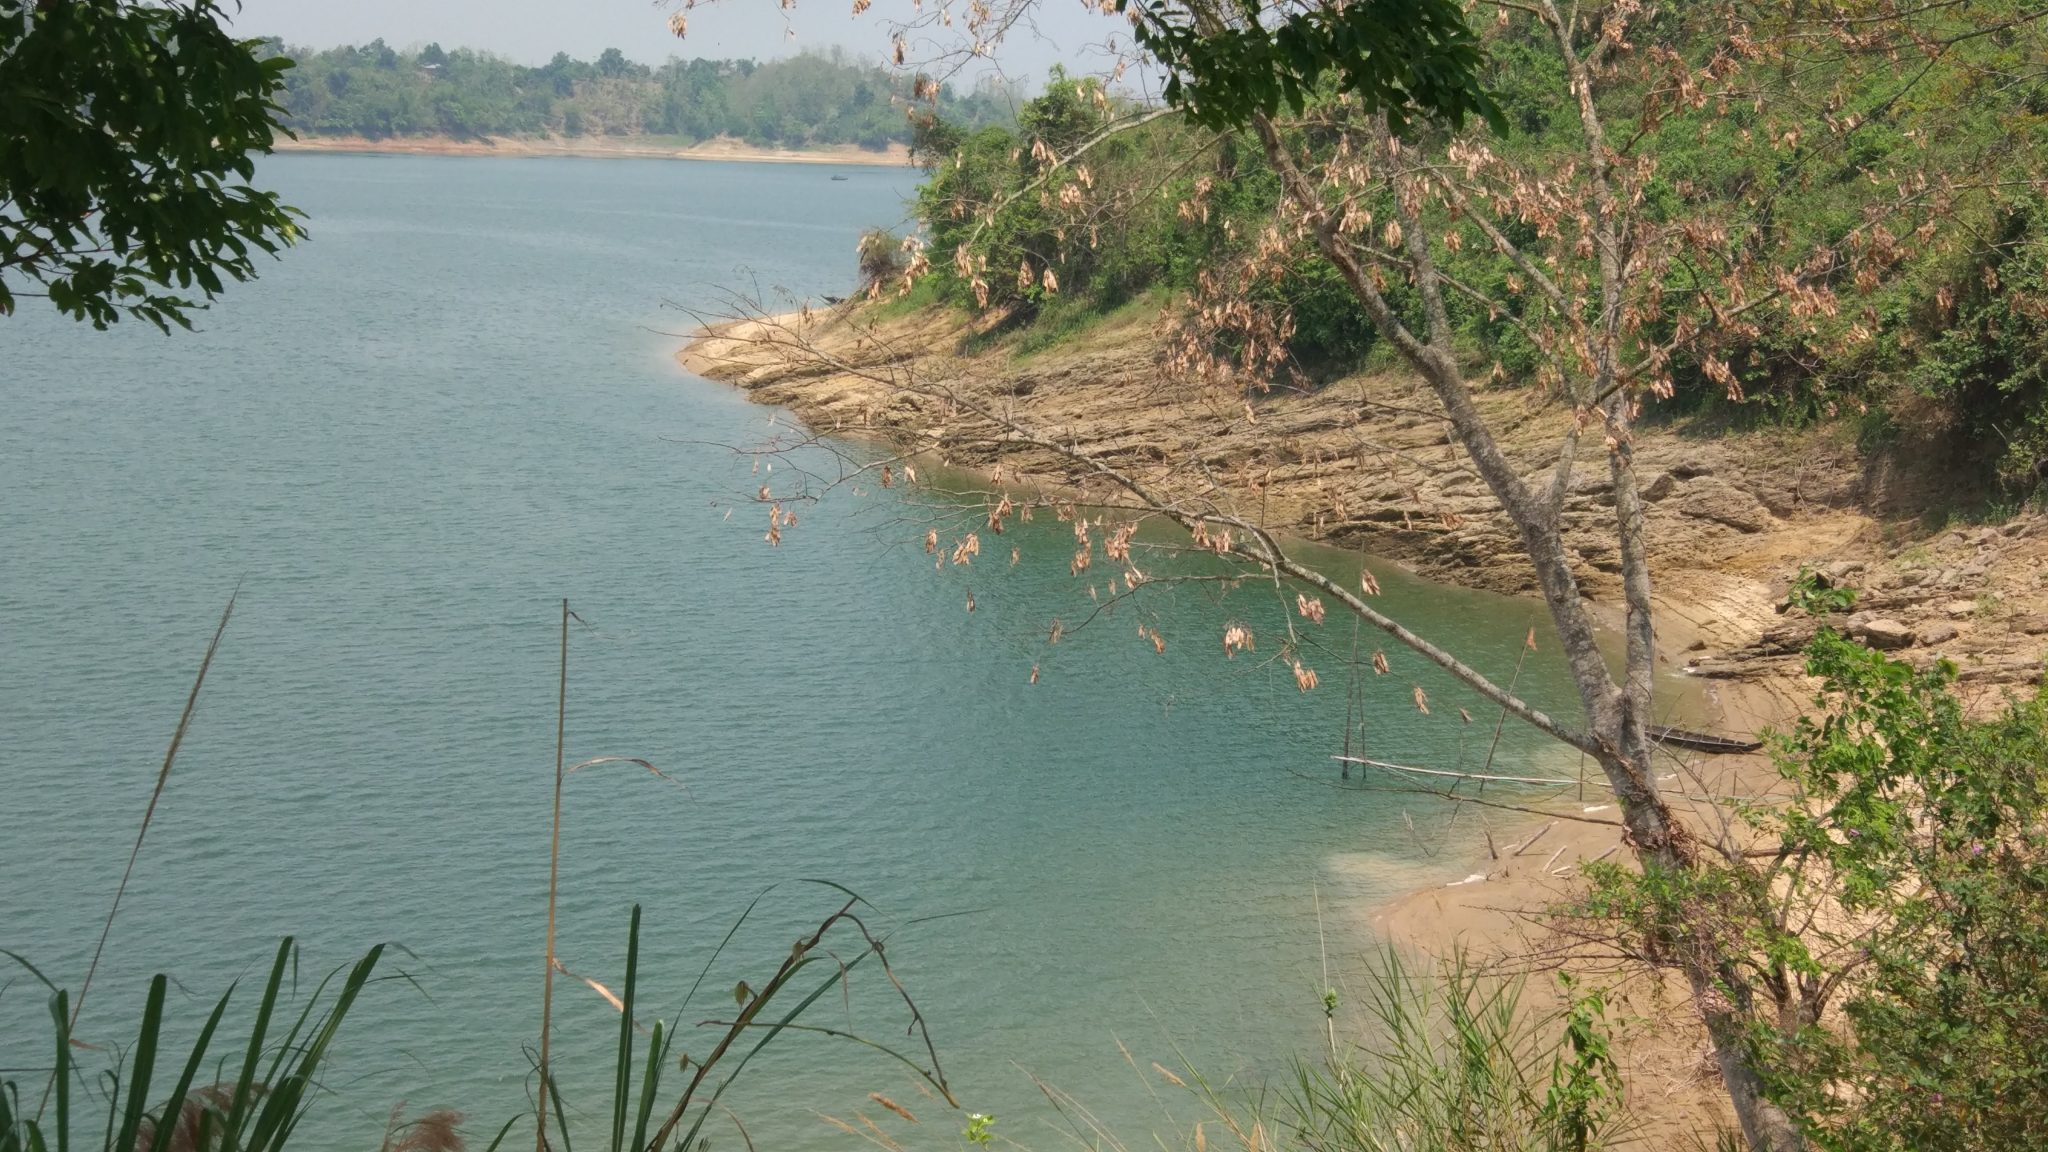 Kaptai Lake side. Sandy shore curing away to the right, small trees along the shore.